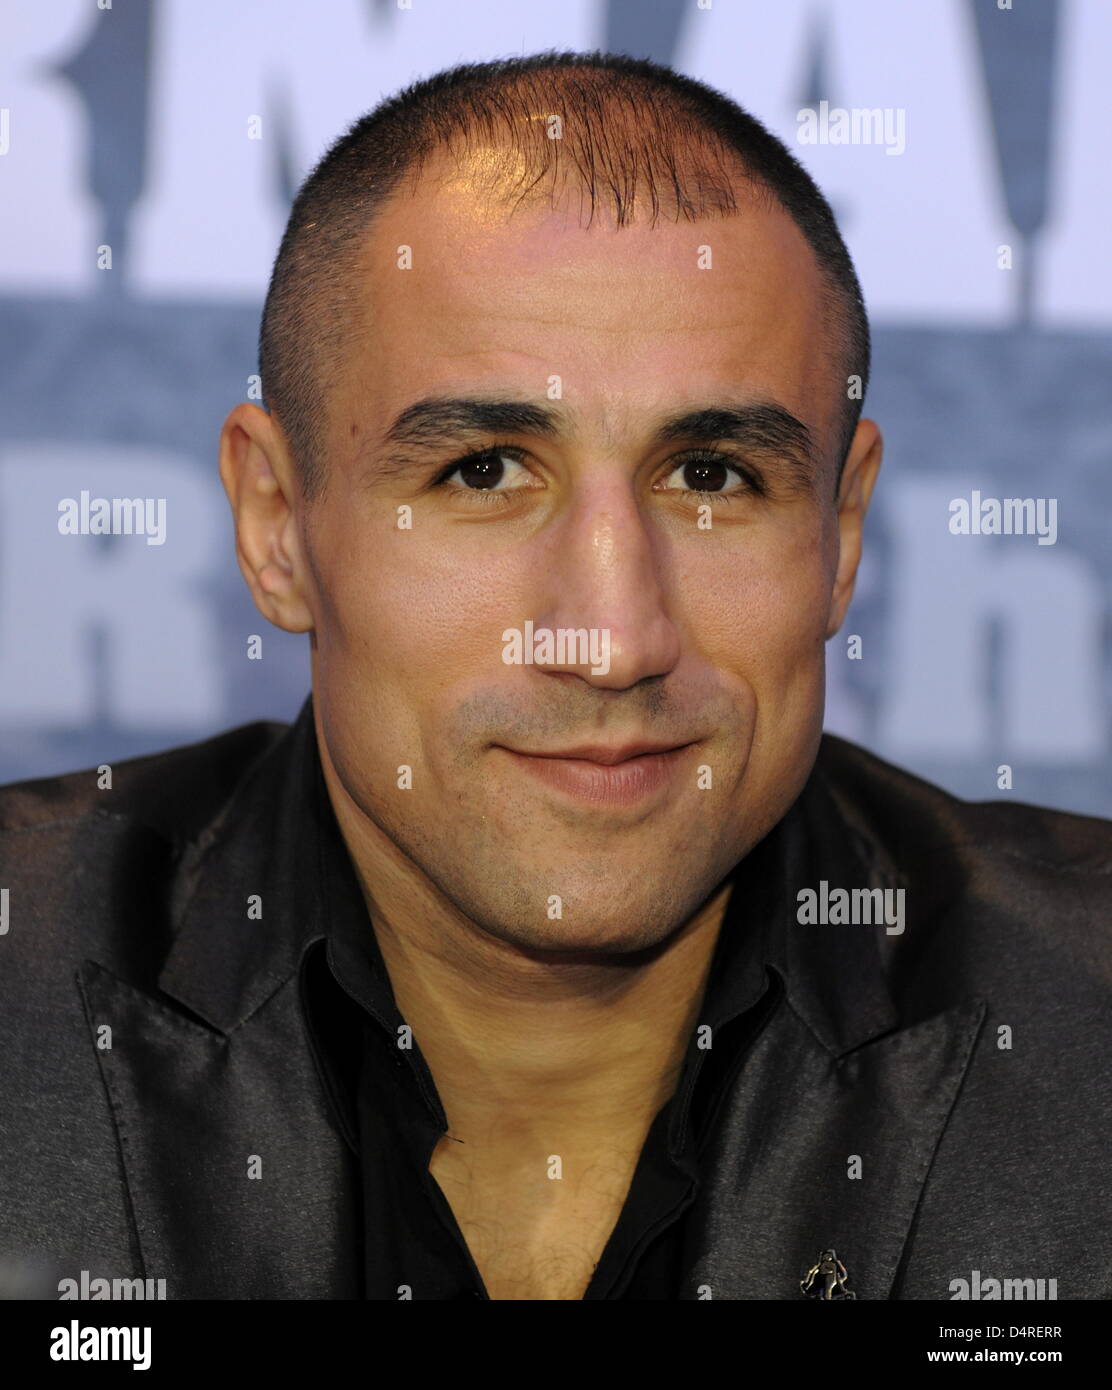 German super middleweight champion Arthur Abraham pictured during a press conference in Berlin, Germany, 14 October 2009. Undefeated Abraham will take on US ... - german-super-middleweight-champion-arthur-abraham-pictured-during-D4RERR